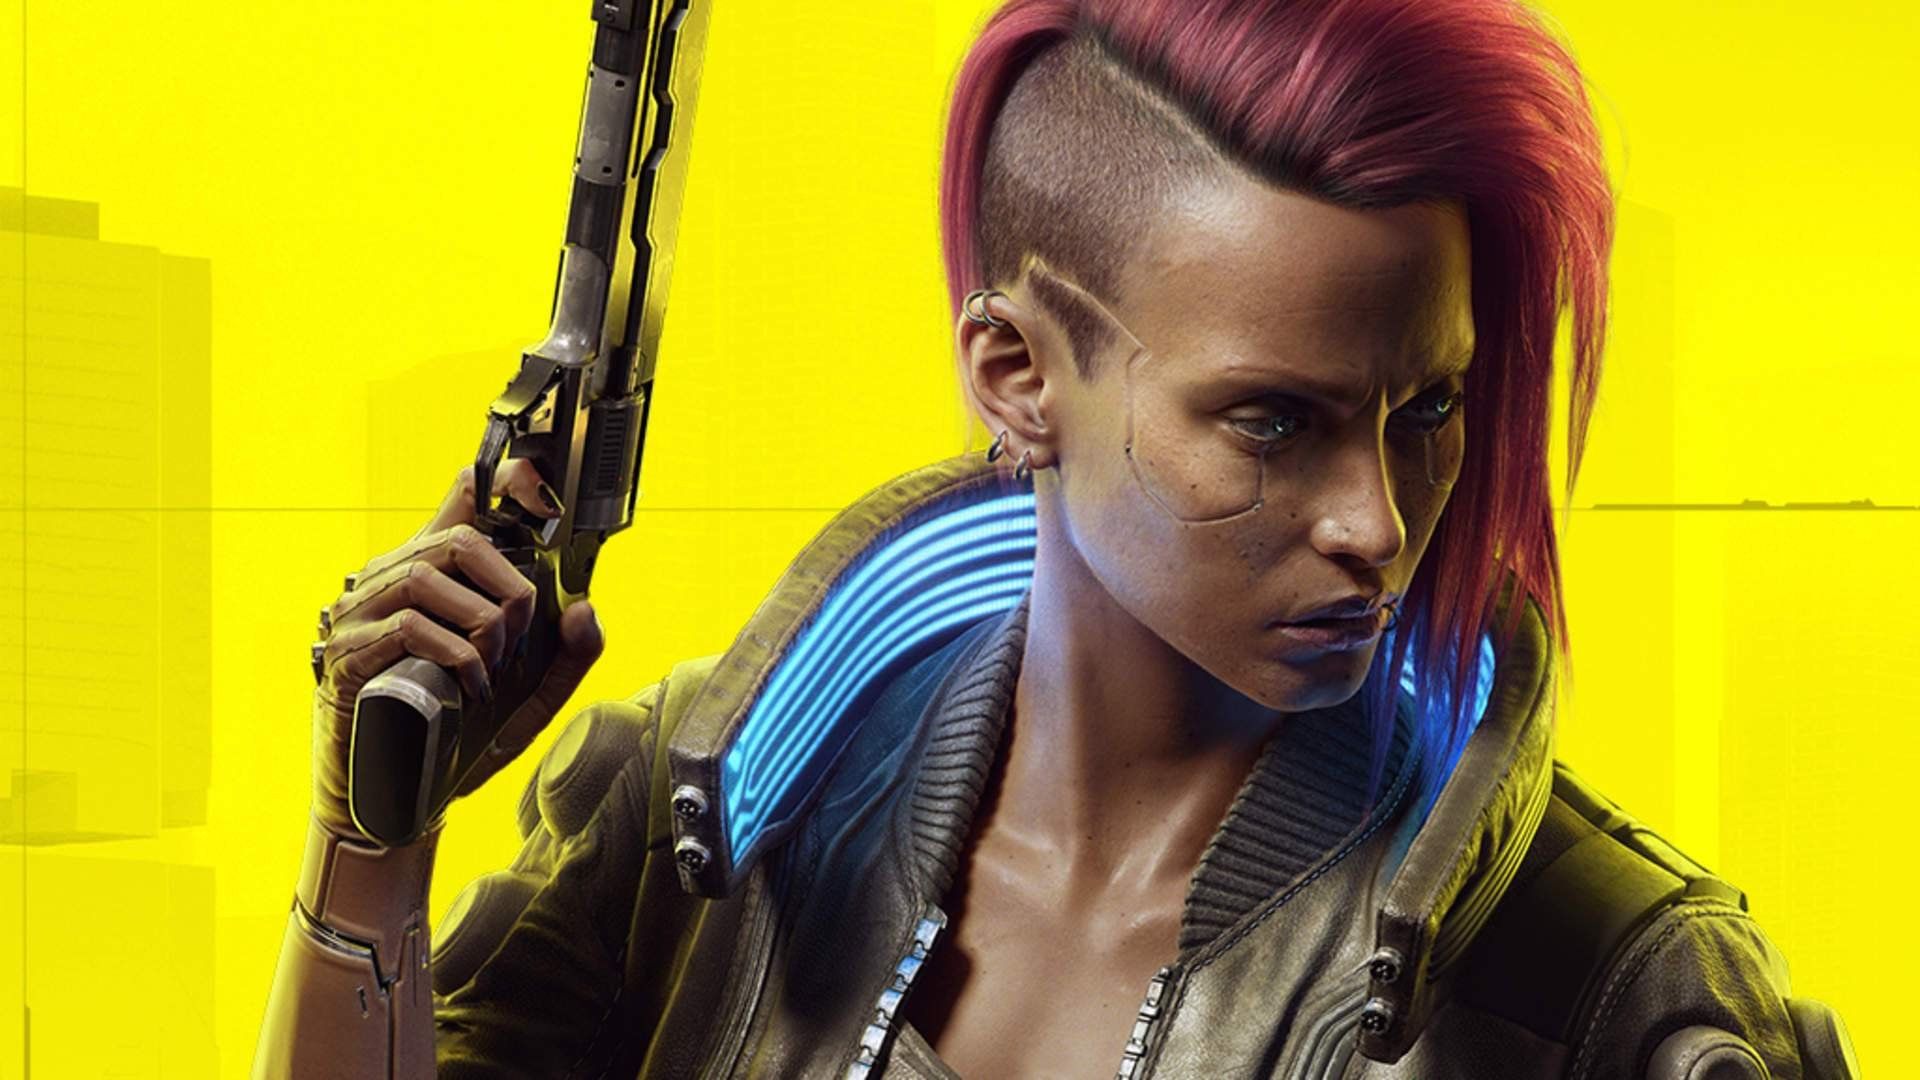 Cyberpunk 2077 Runs At 60 Frames Per Second On PS But There's No Quality Mode